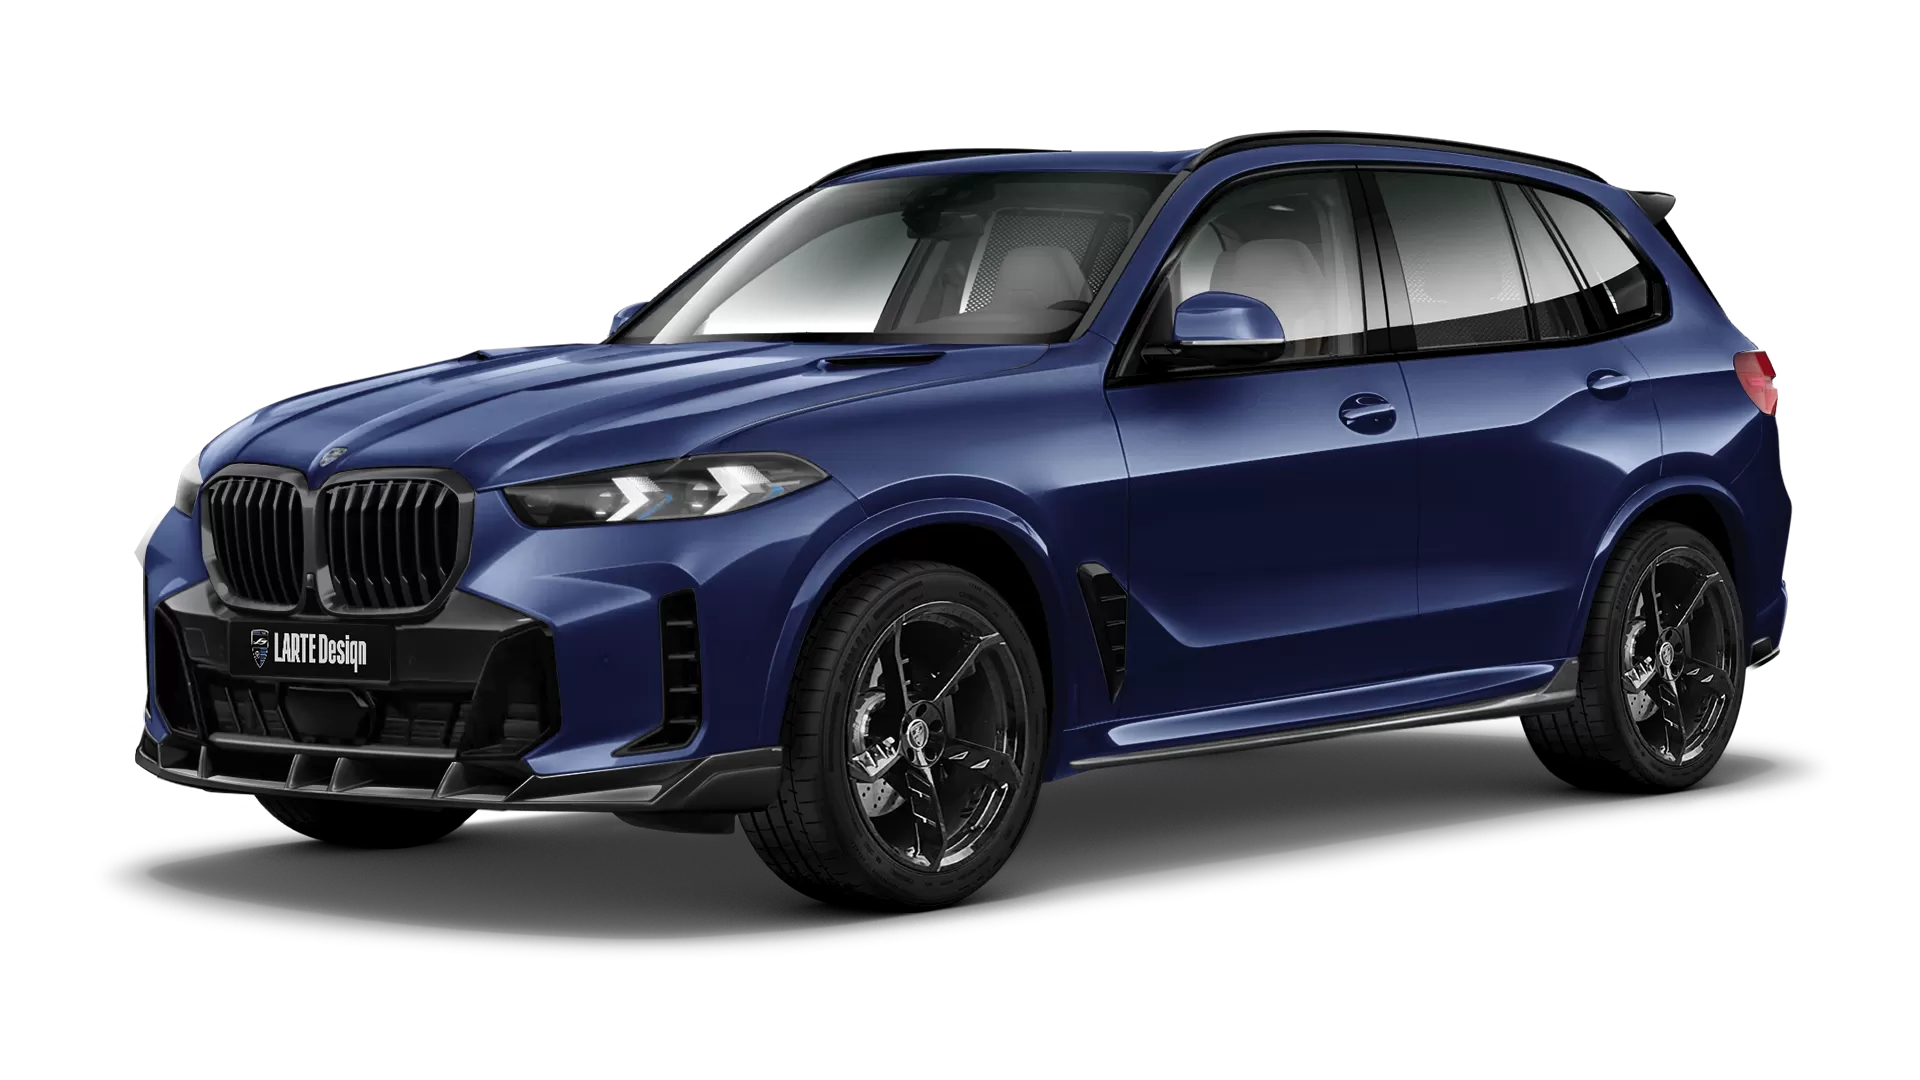 BMW X5 G05 LCI Facelift with painted body kit: front view shown in Tanzanite Blue